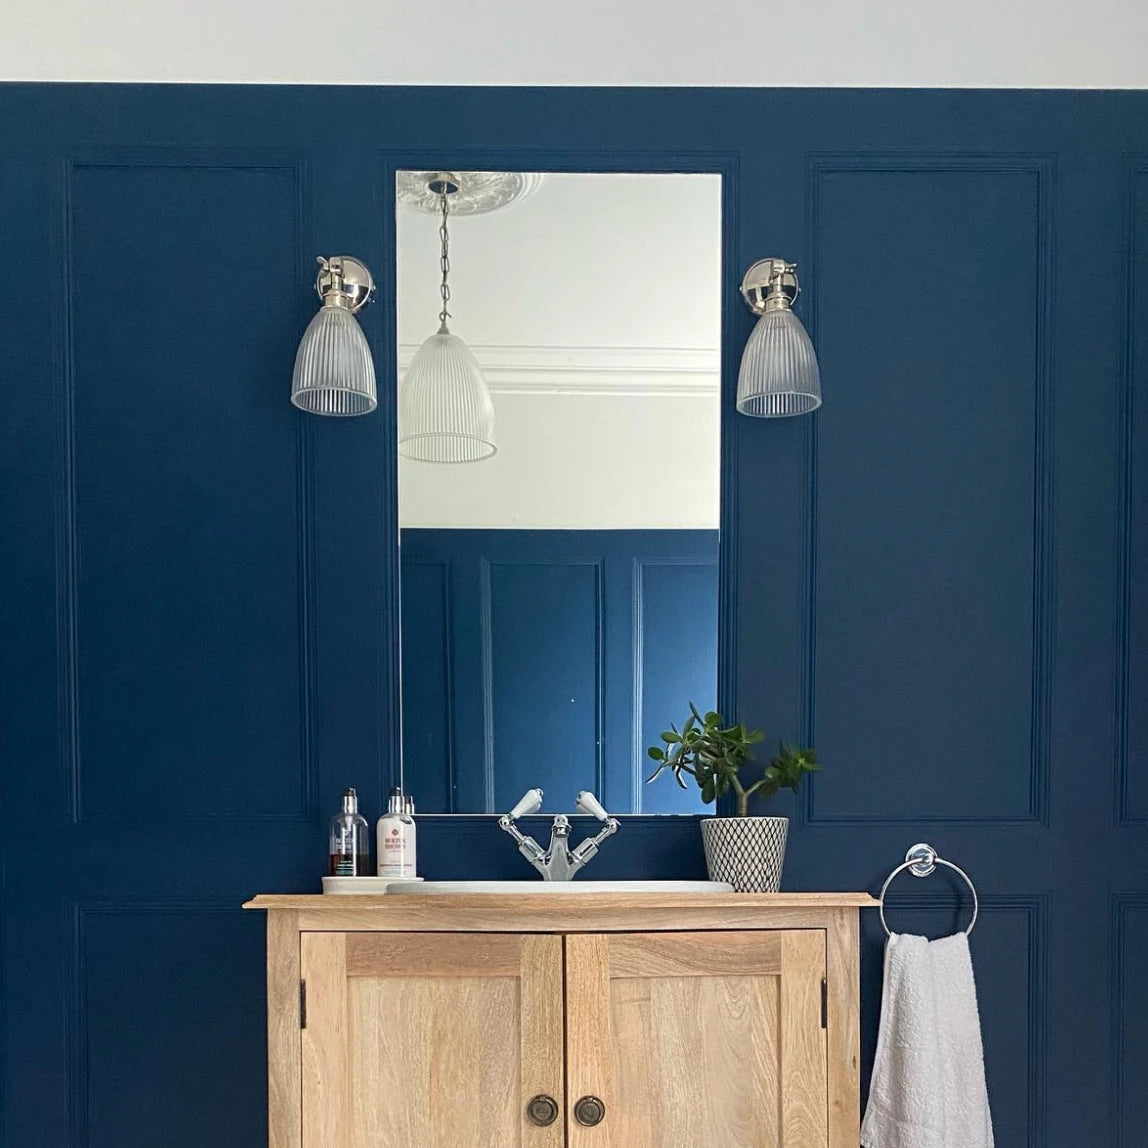 A bathroom with blue walls and a wooden vanity.